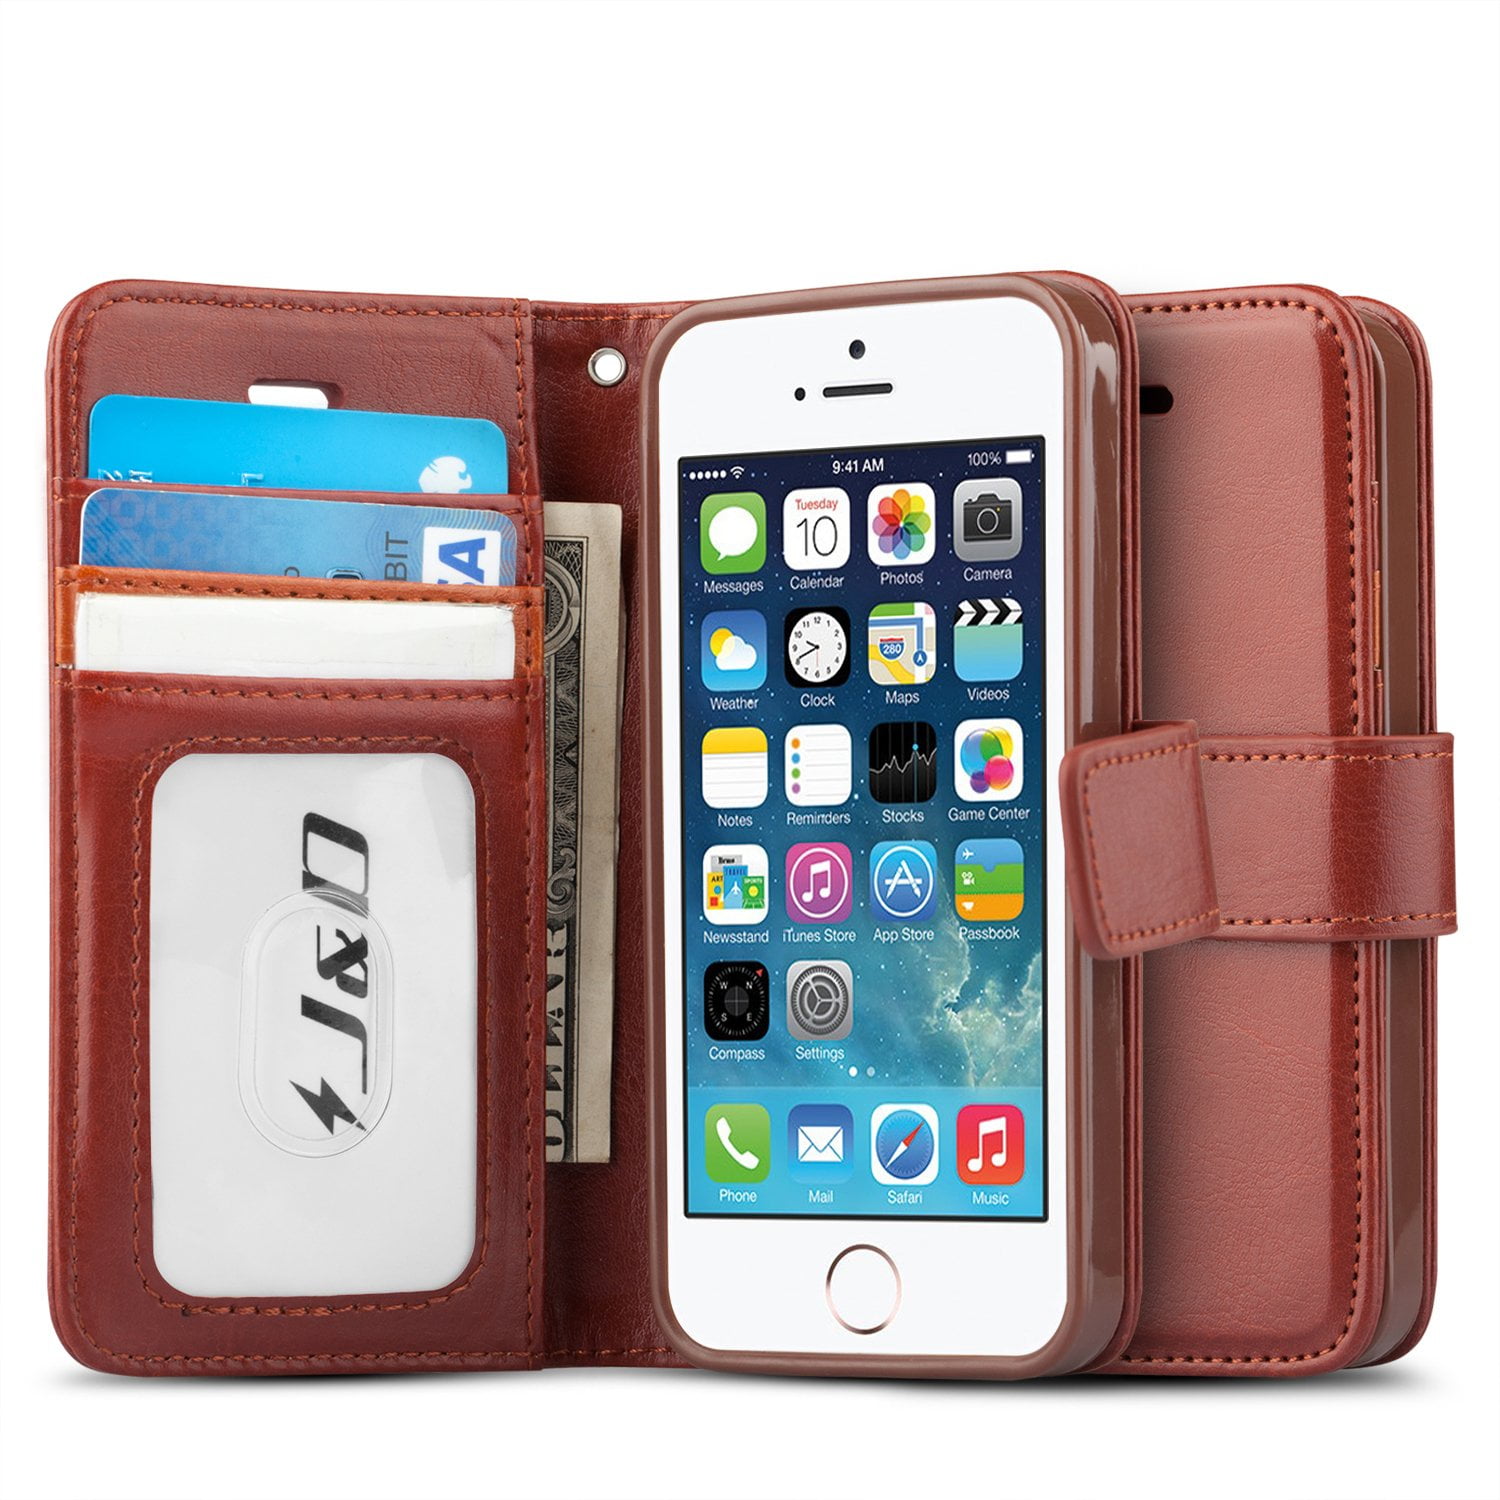 J&D Compatible for iPhone 5S / iPhone 5 Case, [Wallet Stand] [Slim Fit] Heavy Duty Protective Shock Resistant Flip Cover Wallet Case for Apple iPhone 5S, Apple iPhone 5 Wallet Case